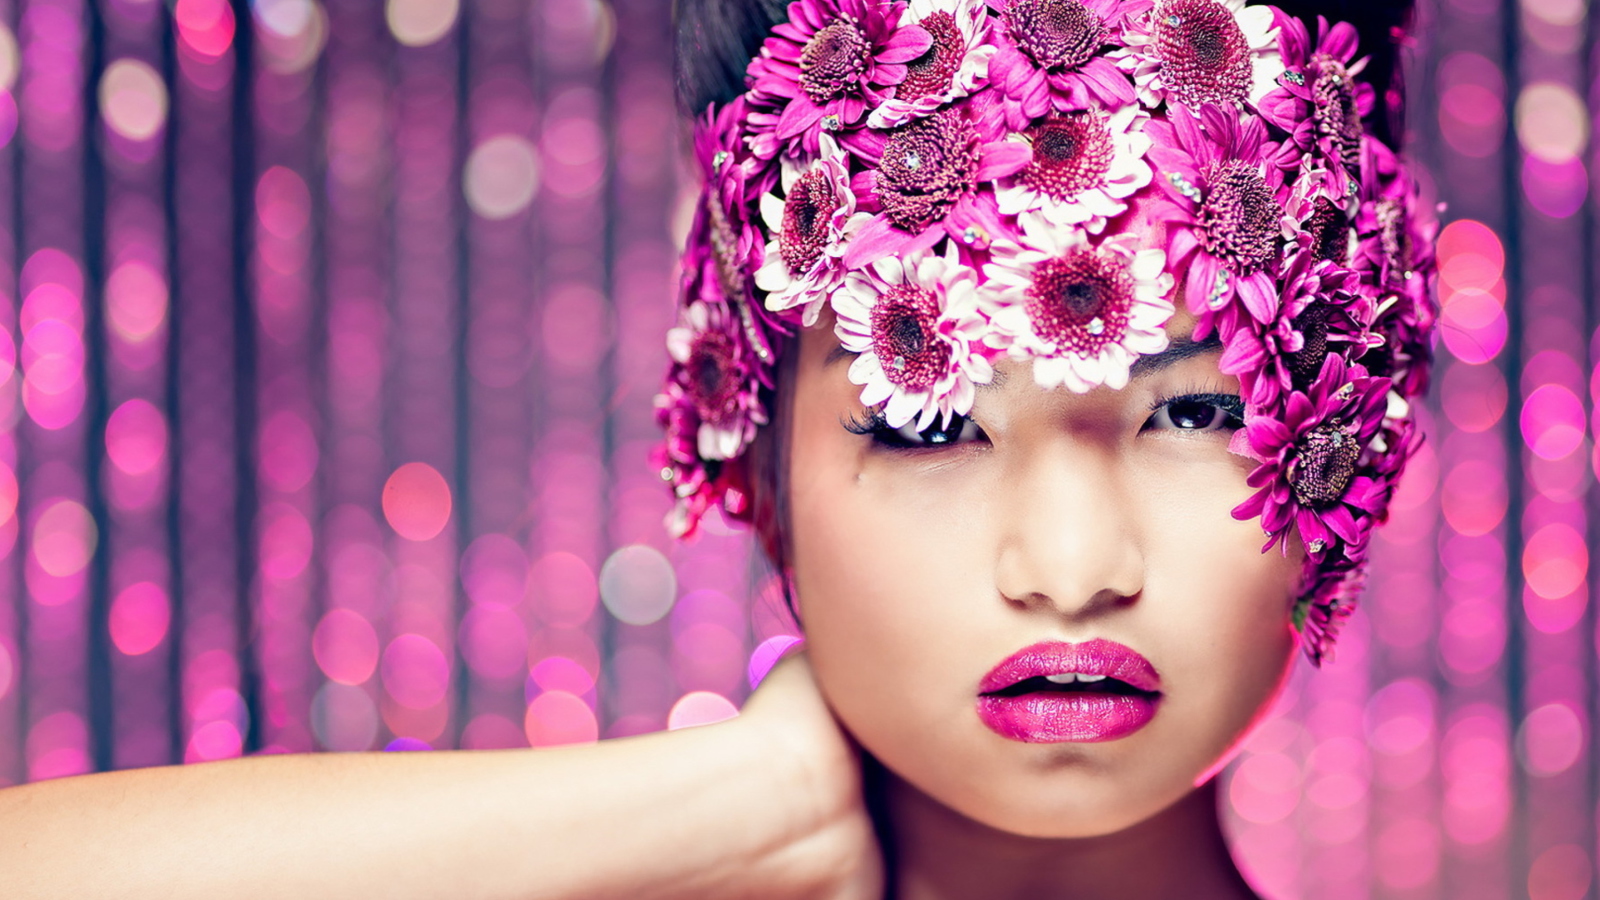 Asian Fashion Model With Pink Flower Wreath wallpaper 1600x900